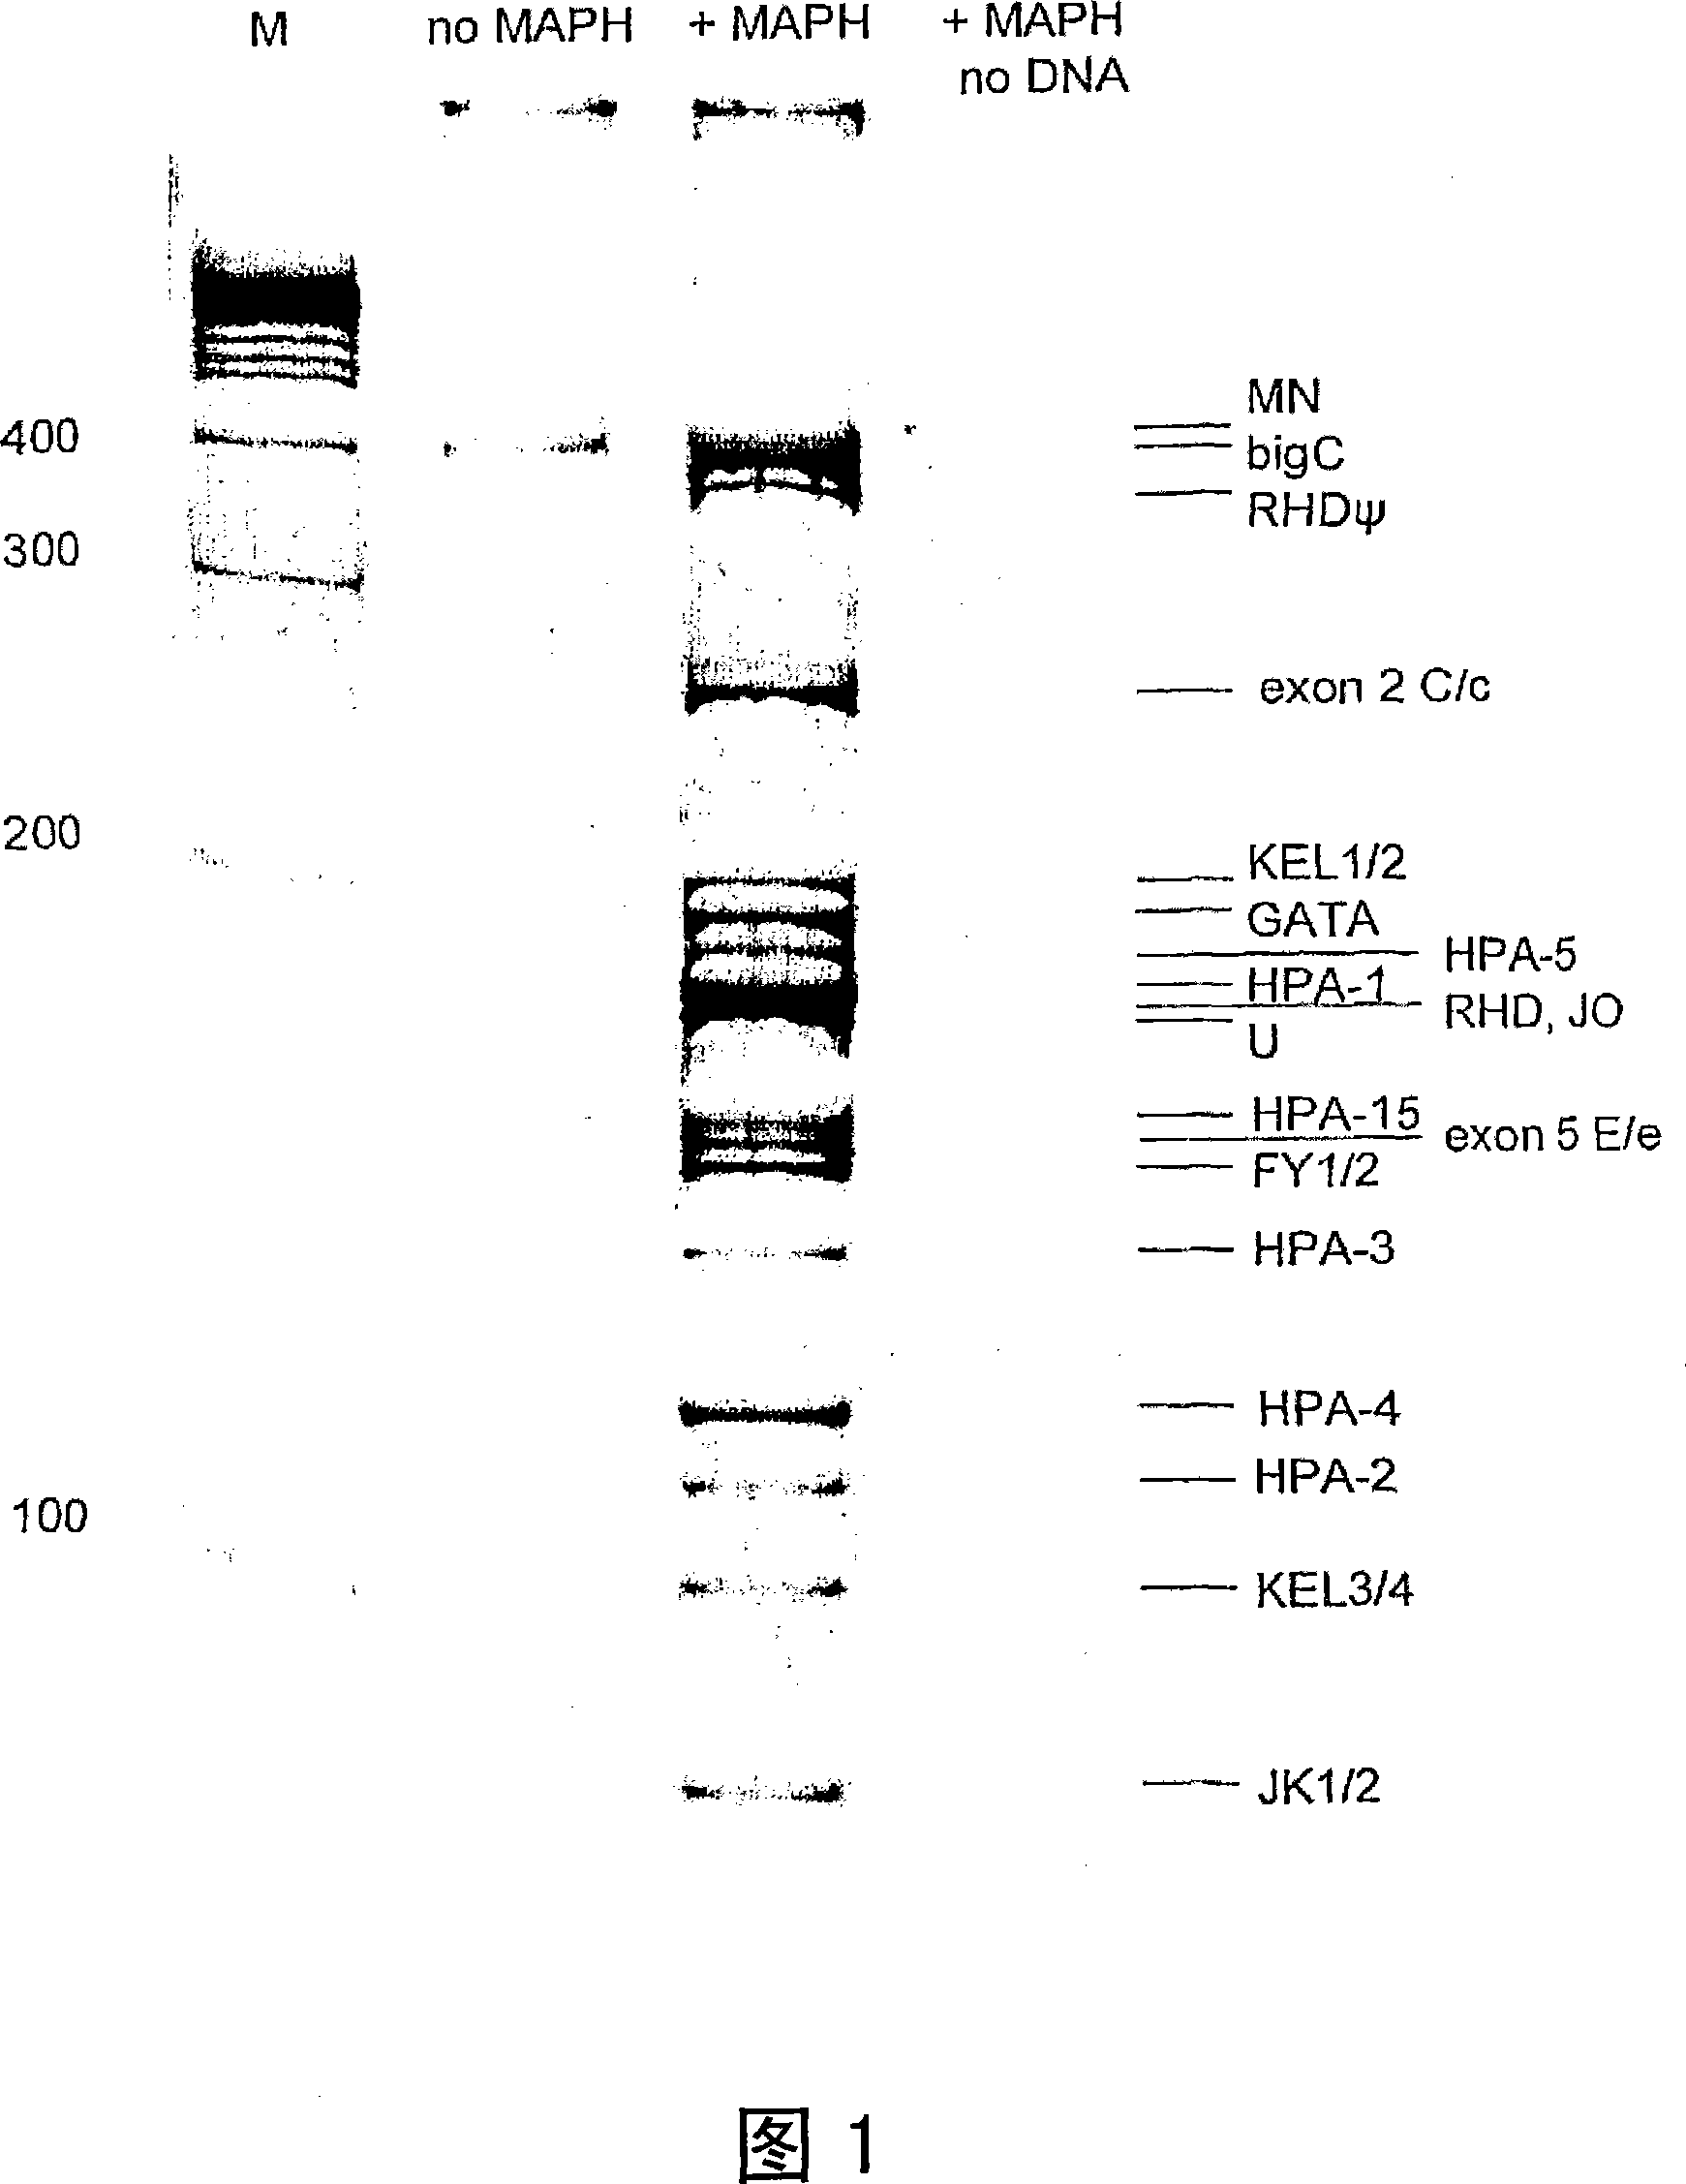 A method of genotyping blood cell antigens and kit suitable for genotyping blood cell antigens